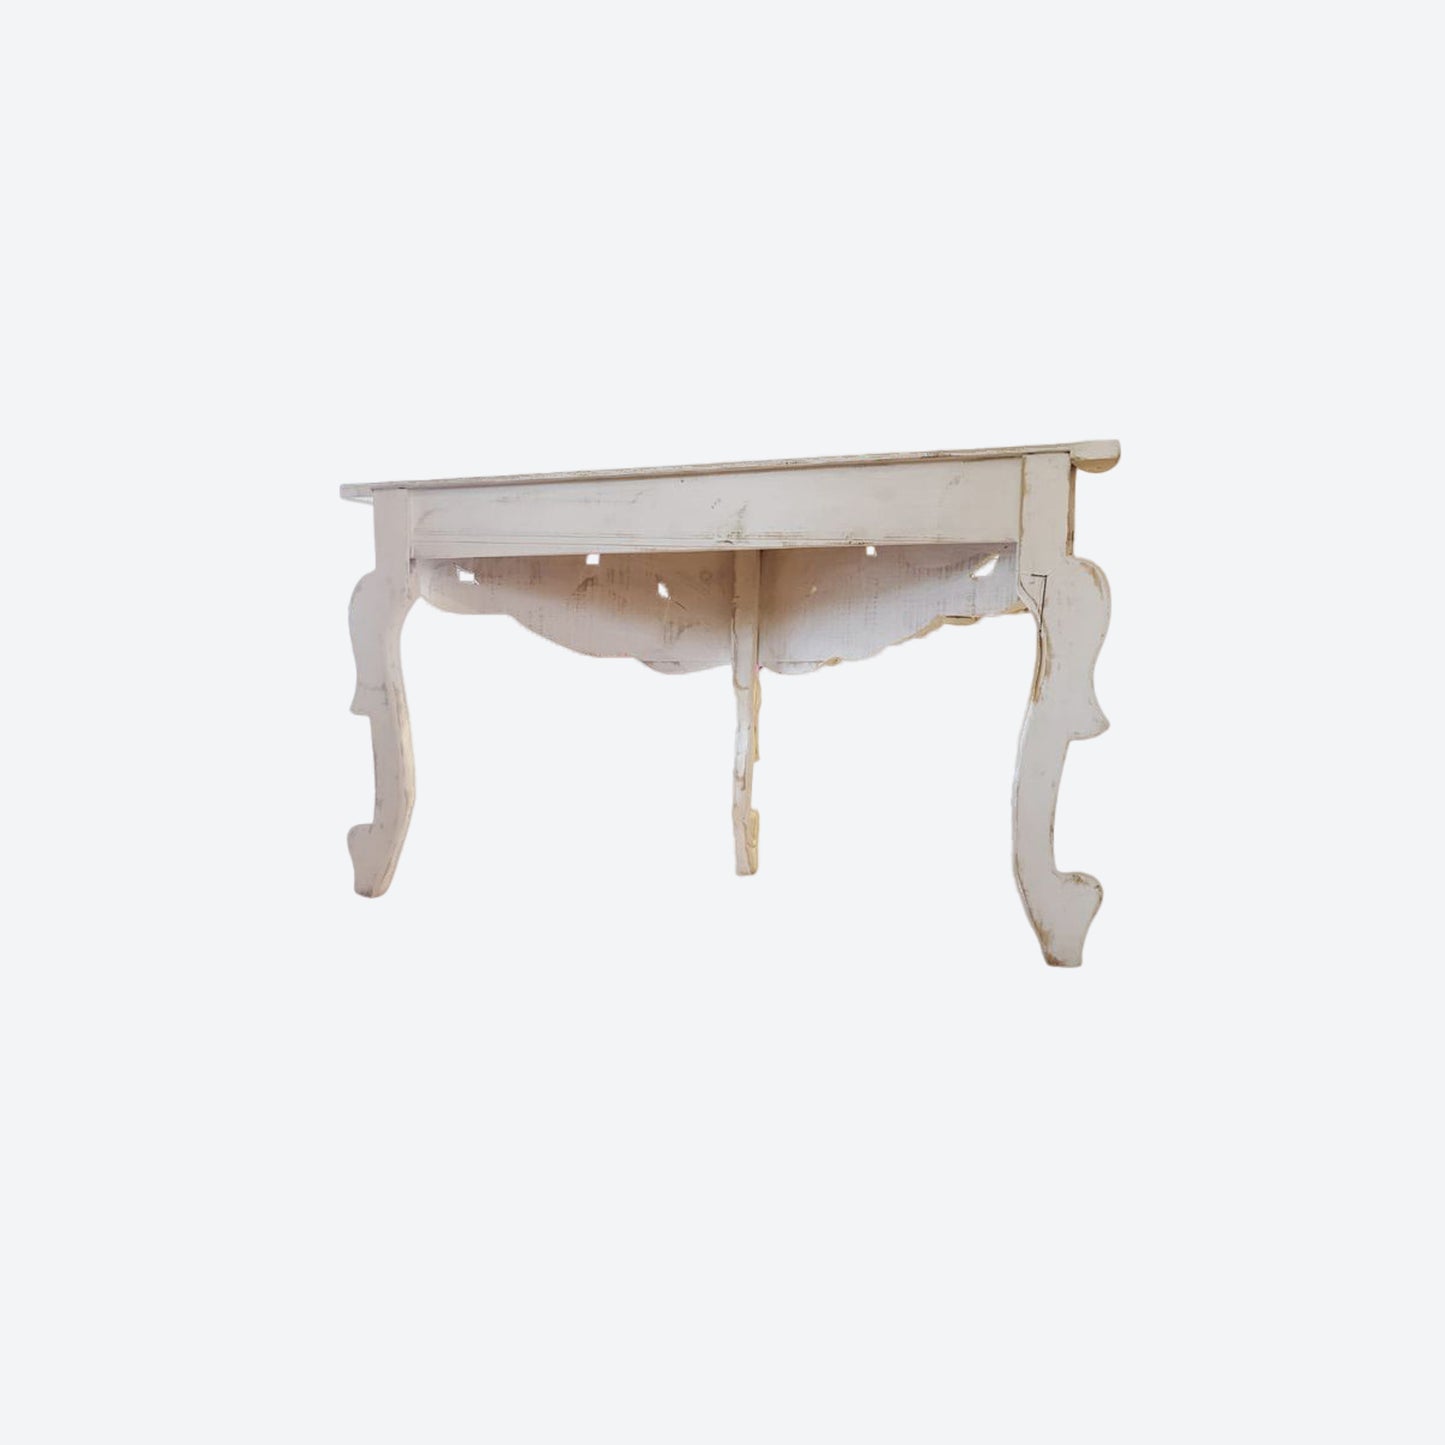 WHITE CEDAR WOOD CONSOLE TABLE WITH LIGHT BROWN ACCENTS -SK (SKU1095)